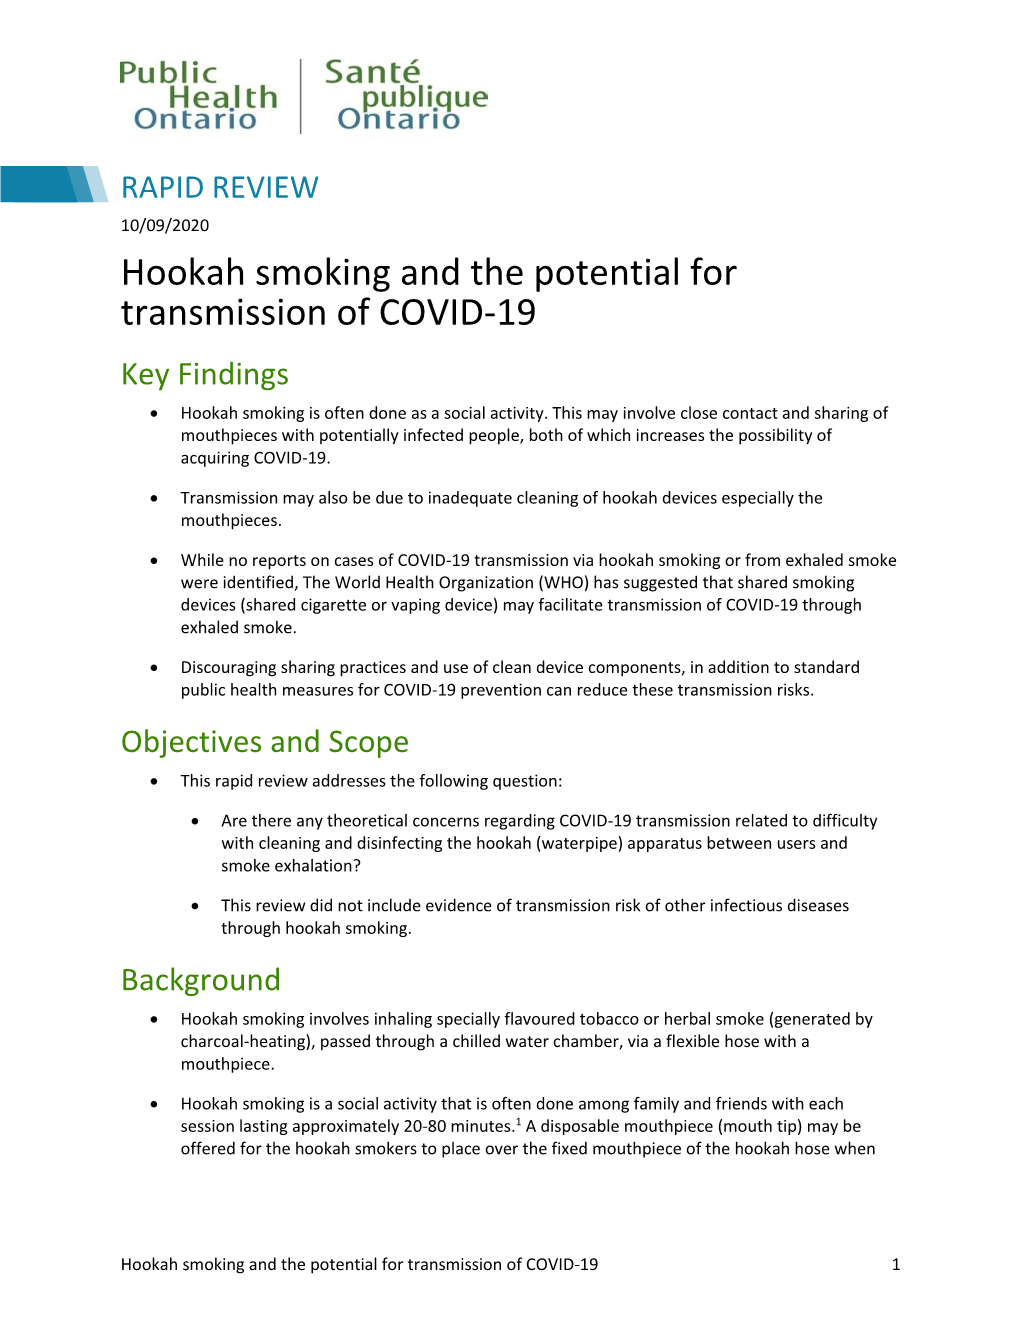 Hookah Smoking and the Potential for Transmission of COVID-19 Key Findings  Hookah Smoking Is Often Done As a Social Activity